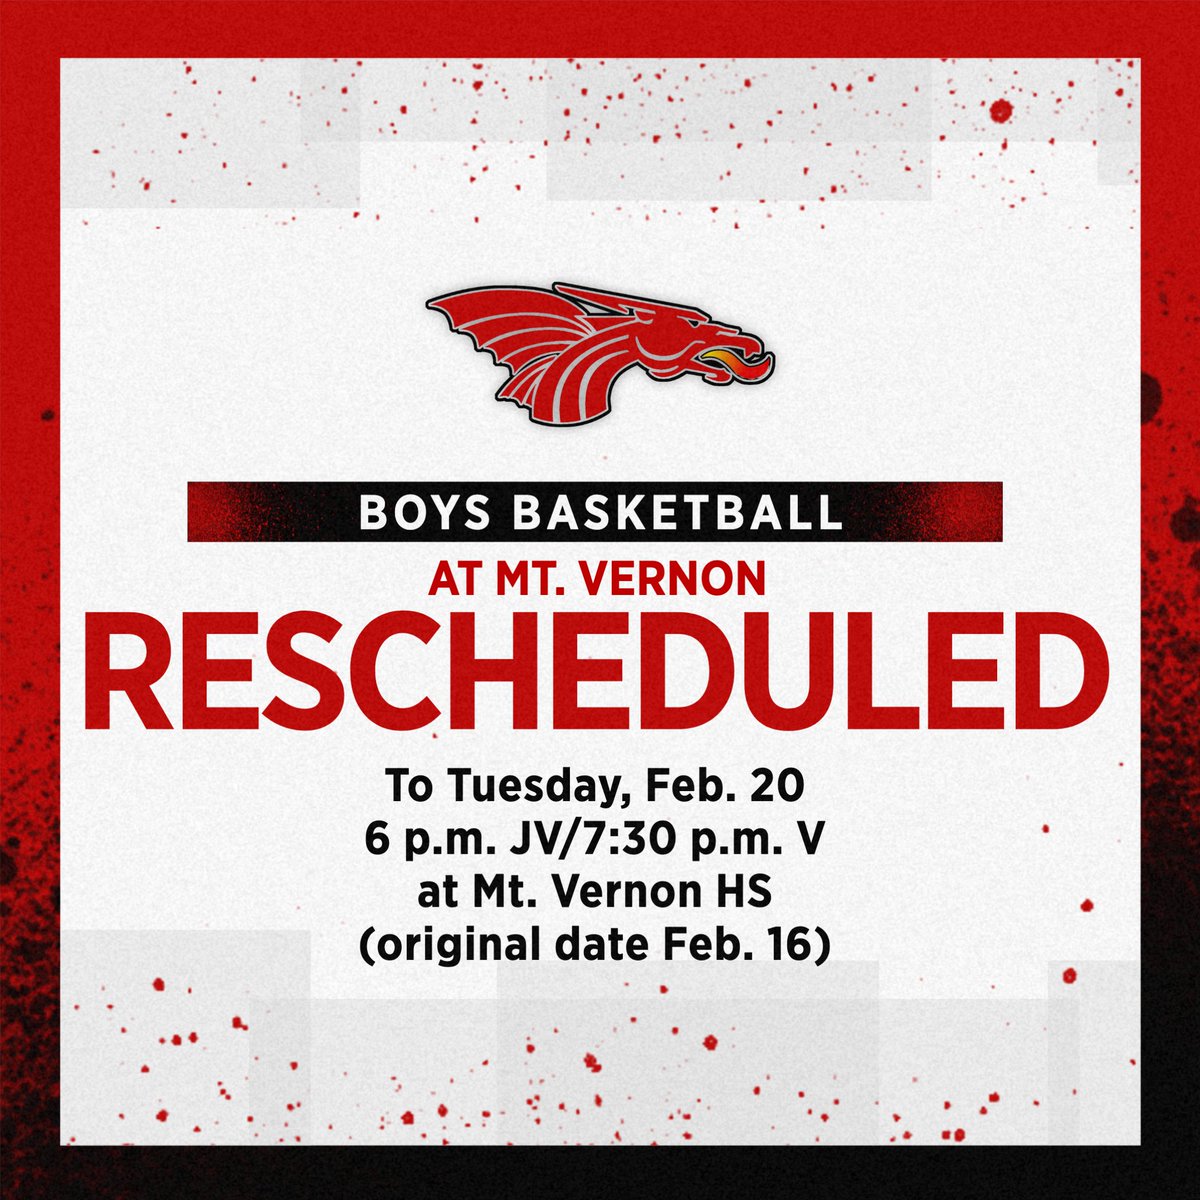 Tonight's boys basketball game at Mt. Vernon has been postponed due to hazardous travel conditions. The 91st meeting between the Dragons and Marauders has been rescheduled to Tuesday, Feb. 20, with a 6 p.m. JV tip, followed by the varsity at 7:30 p.m.